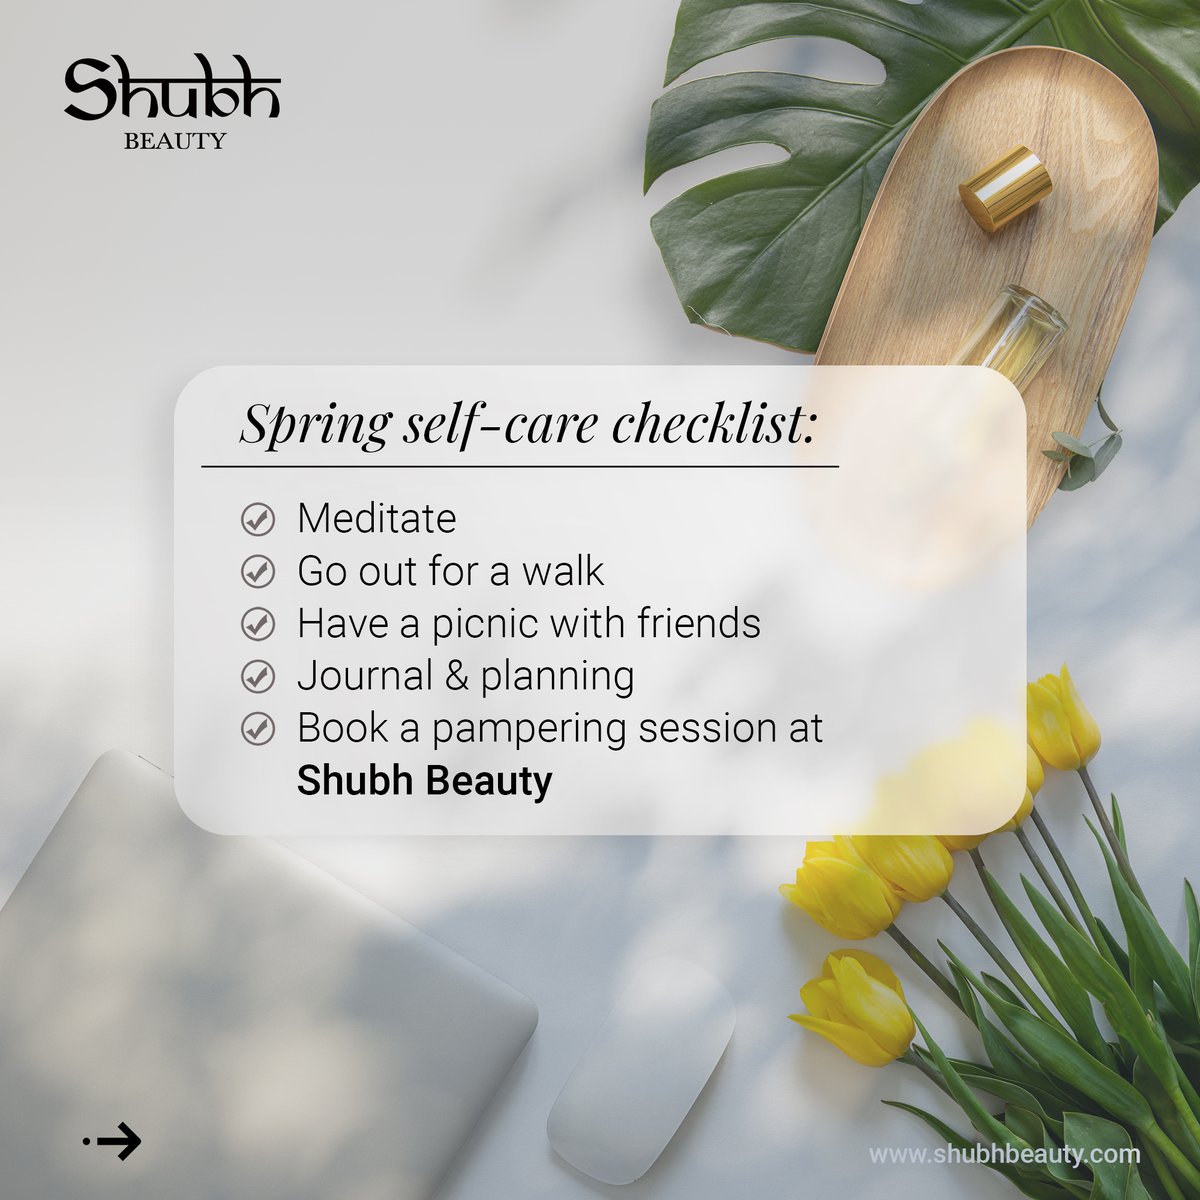 Make the most of the springtime vibes with our self-care to-do list. Indulge in the simple pleasures of the season, including a pampering session at Shubh Beauty!
.
.
.
#SpringSelfCare #SelfCareSeason #PamperYourself #SpringtimeIndulgence #Relax #Beauty #Salon #ShubhBeauty